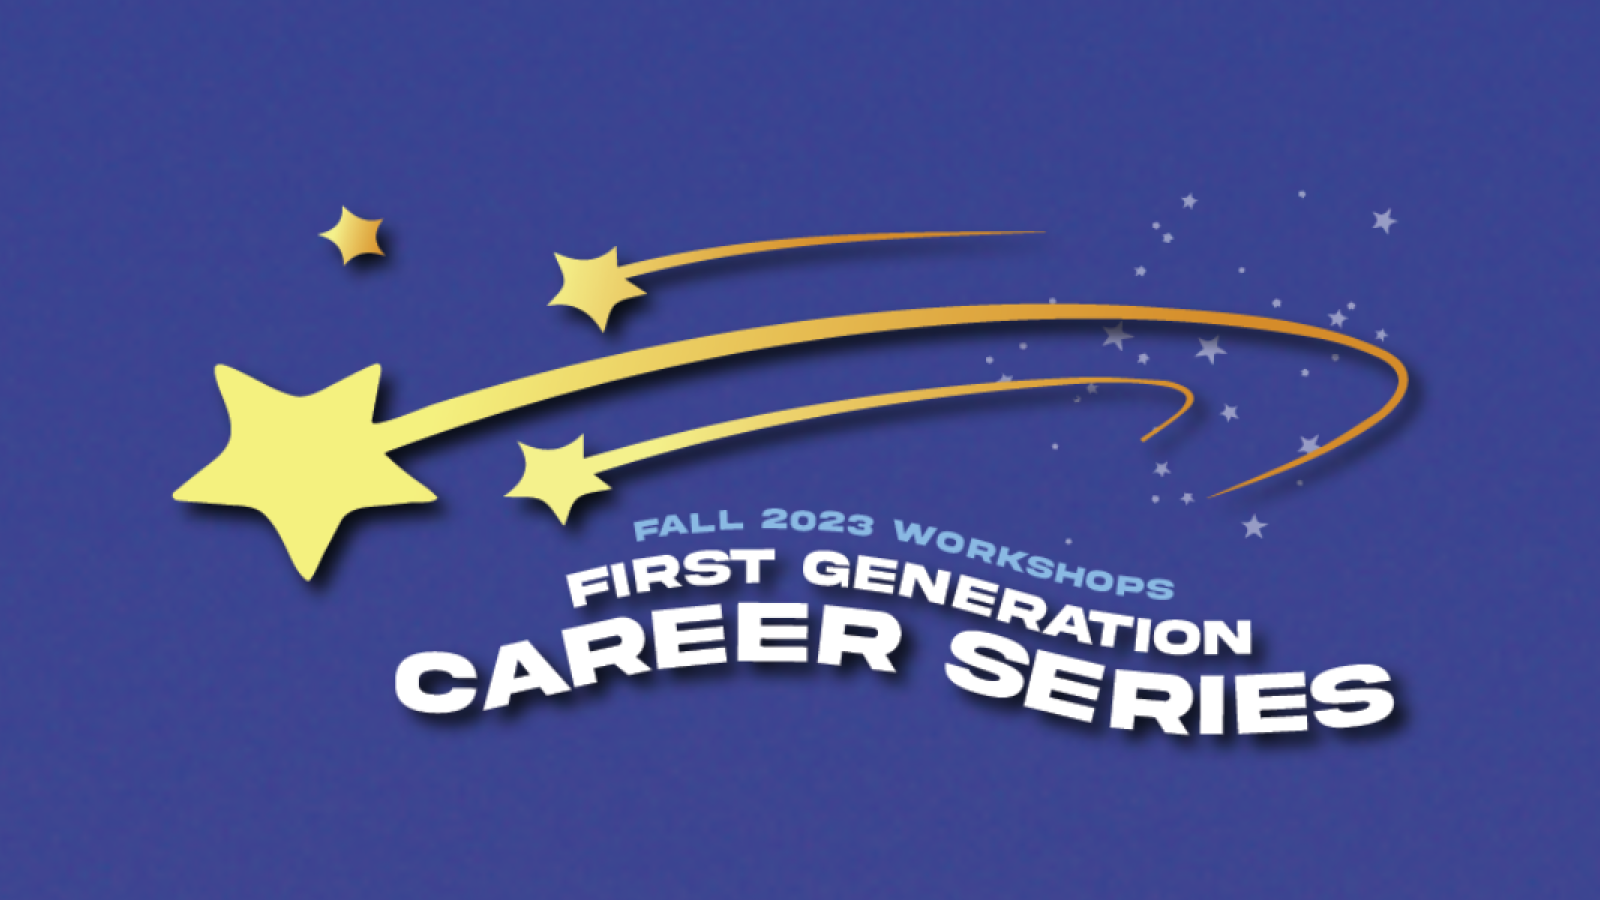 Fall 2023 Workshops First Generation Career Series